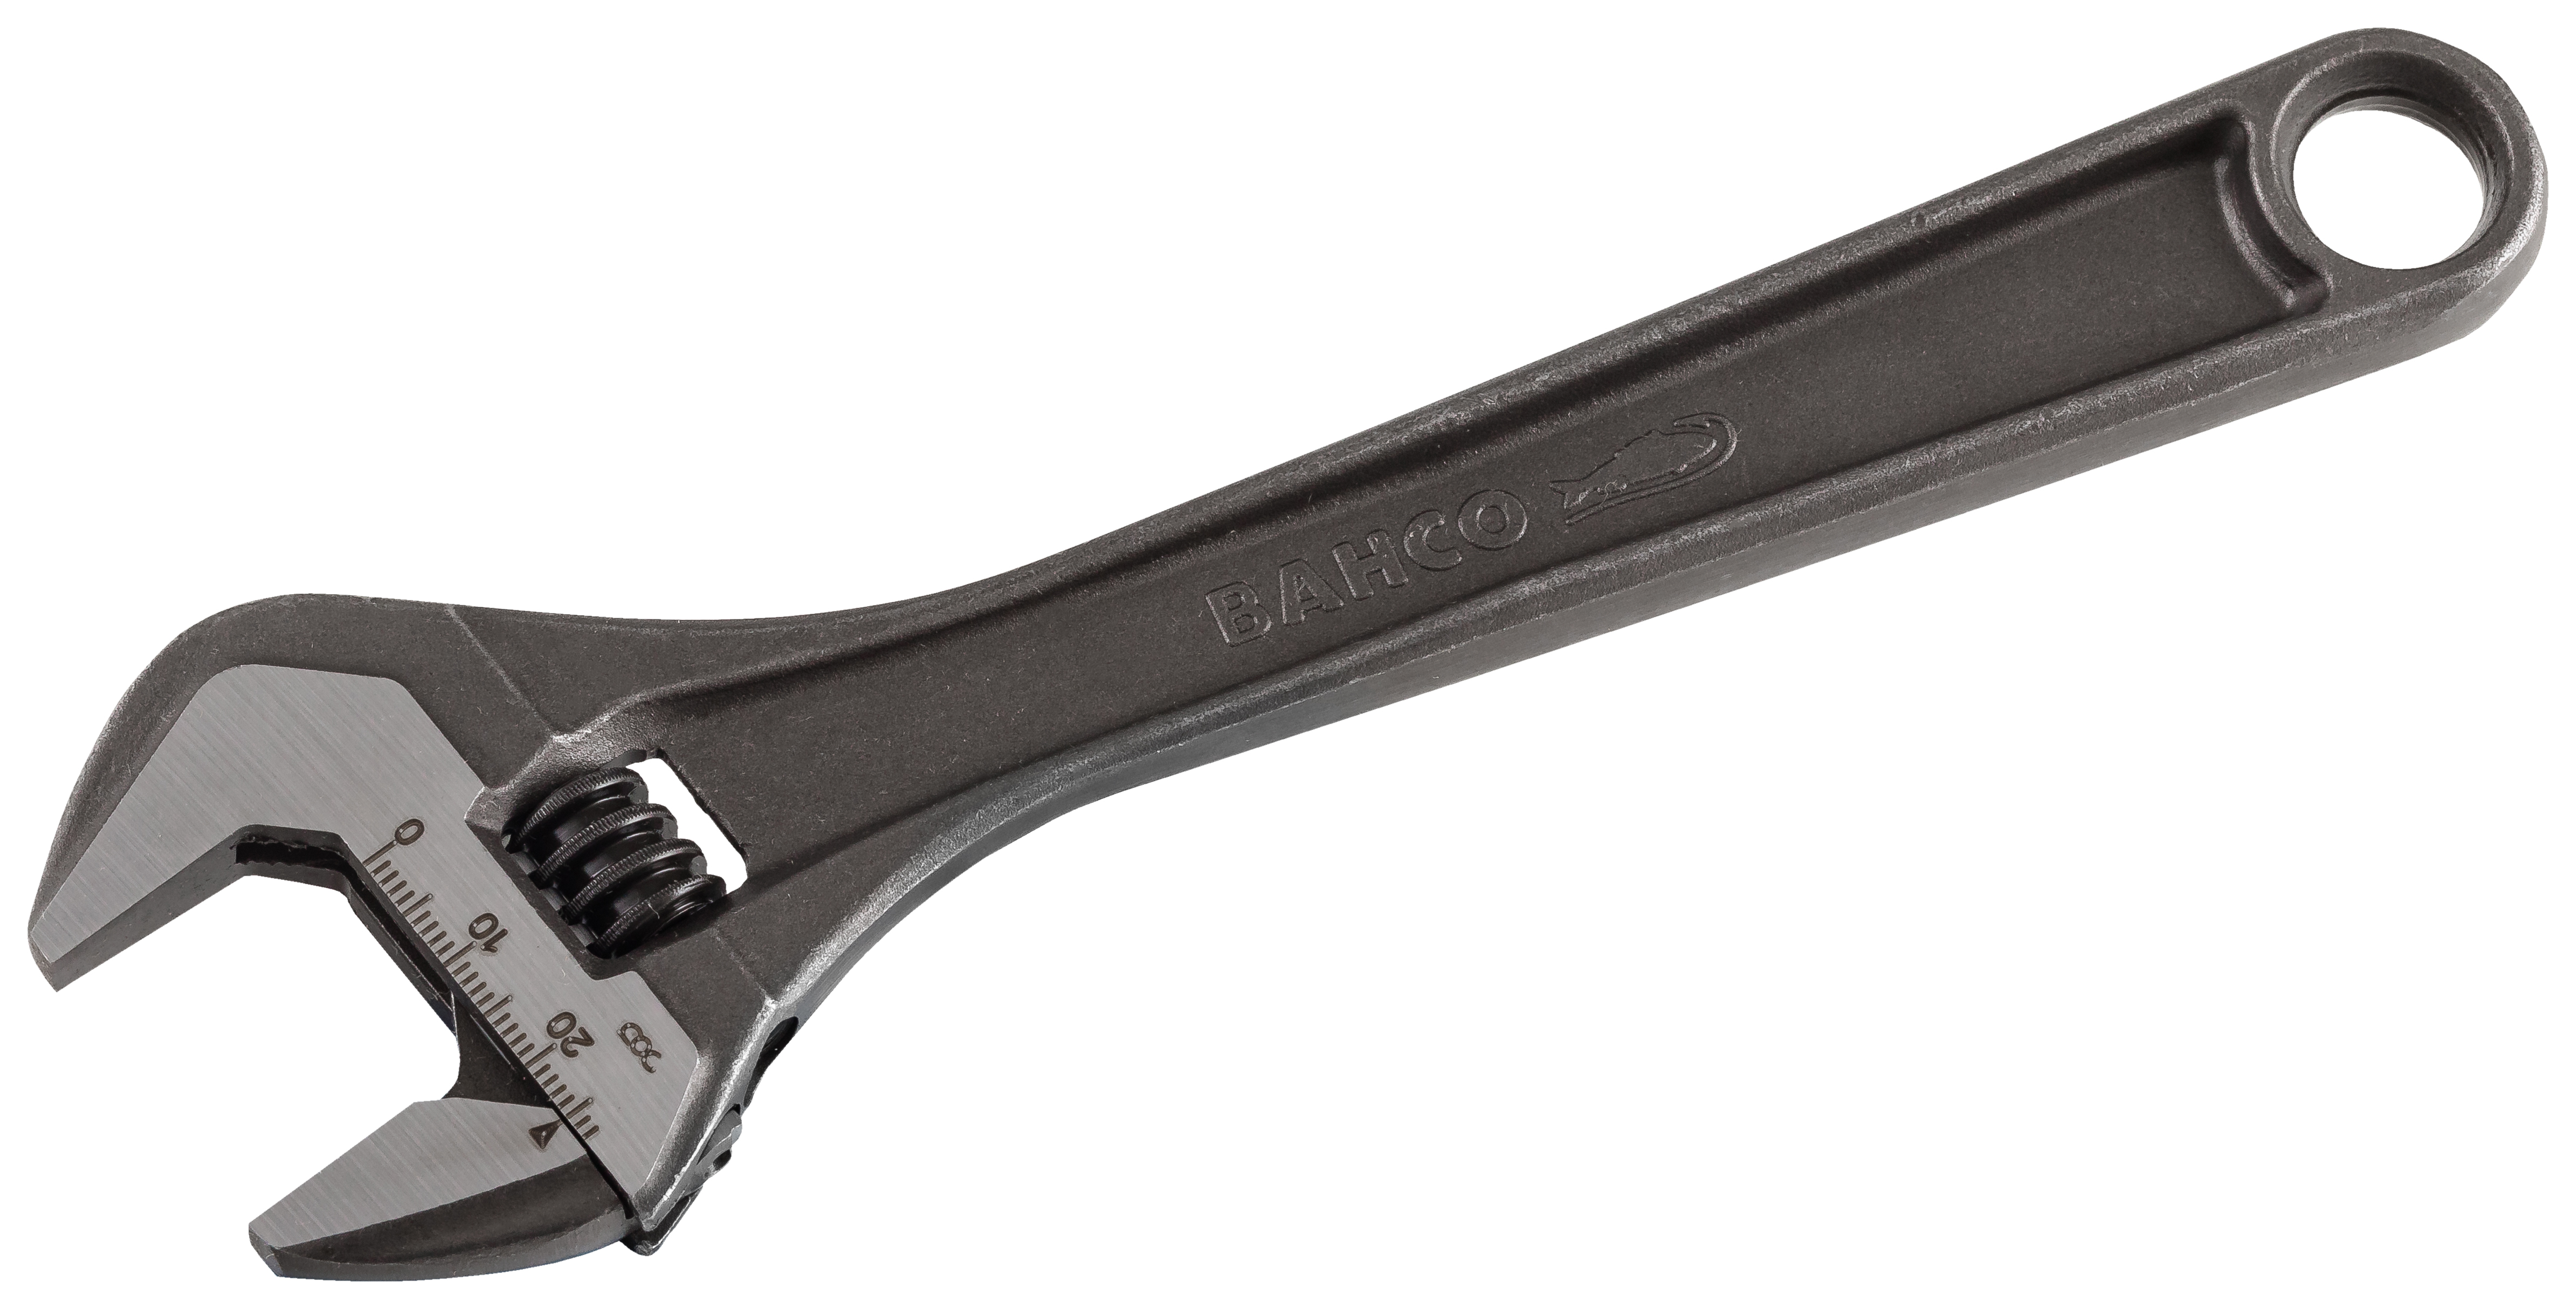 Image of Bahco BAH8071 Adjustable Wrench - 8in / 203mm